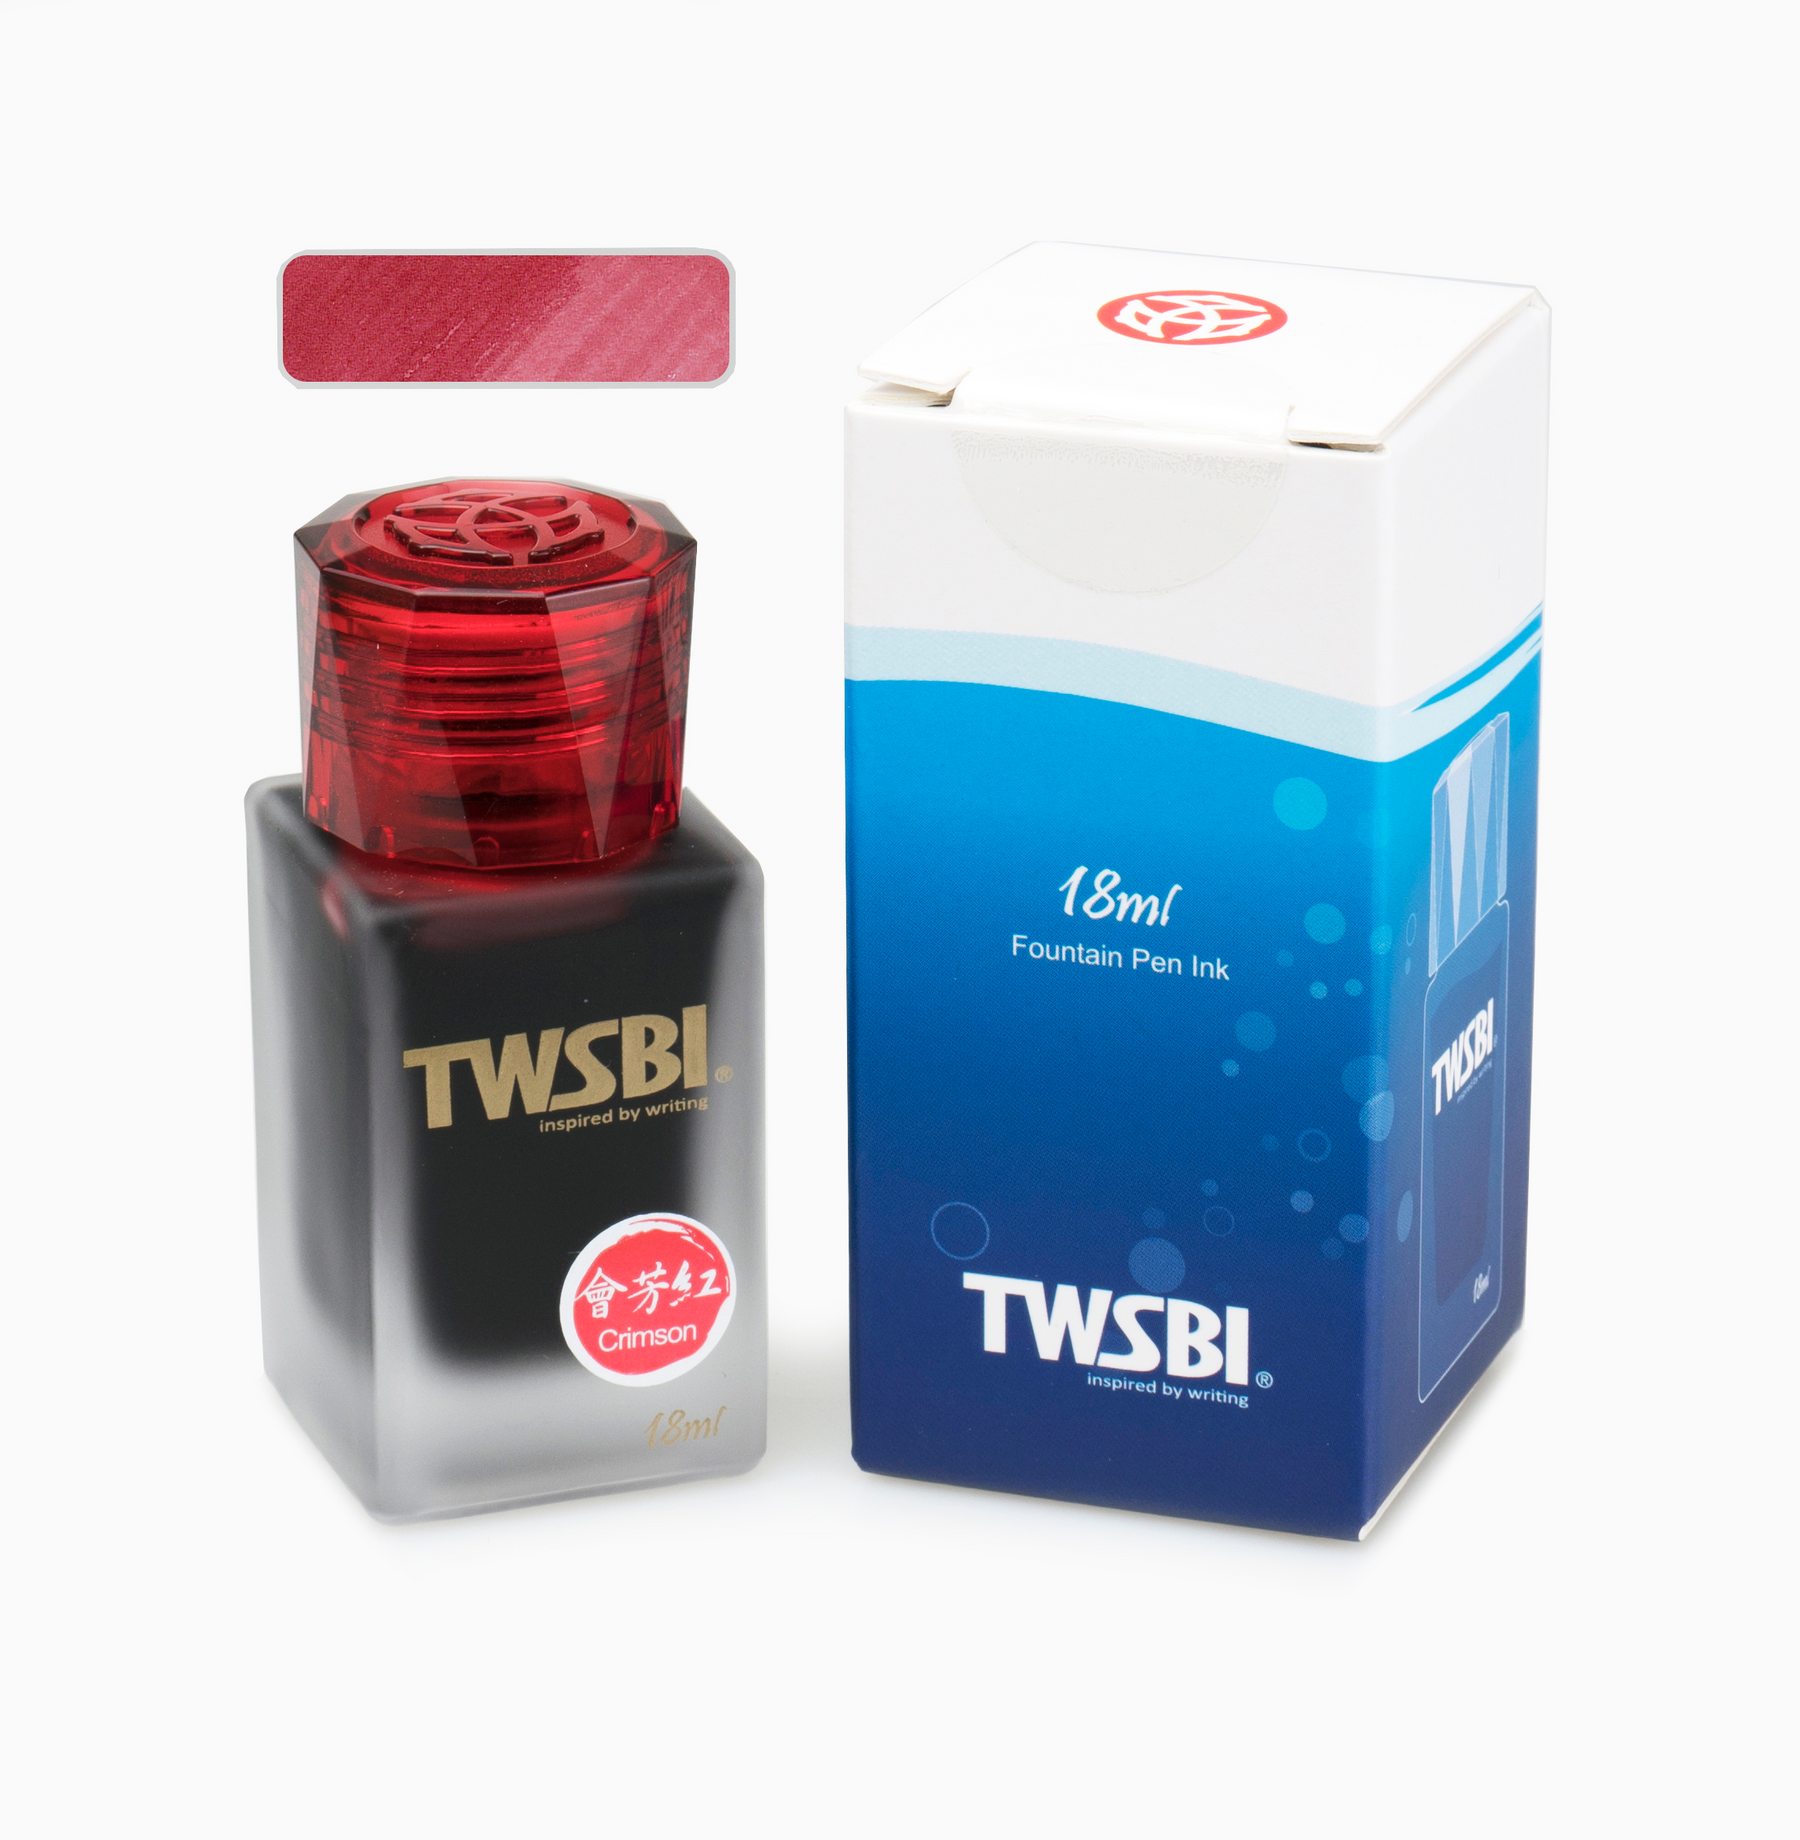 TWSBI Crimson is a dark red fountain pen ink. TWSBI is based in Taiwan and the ink is produced in China.